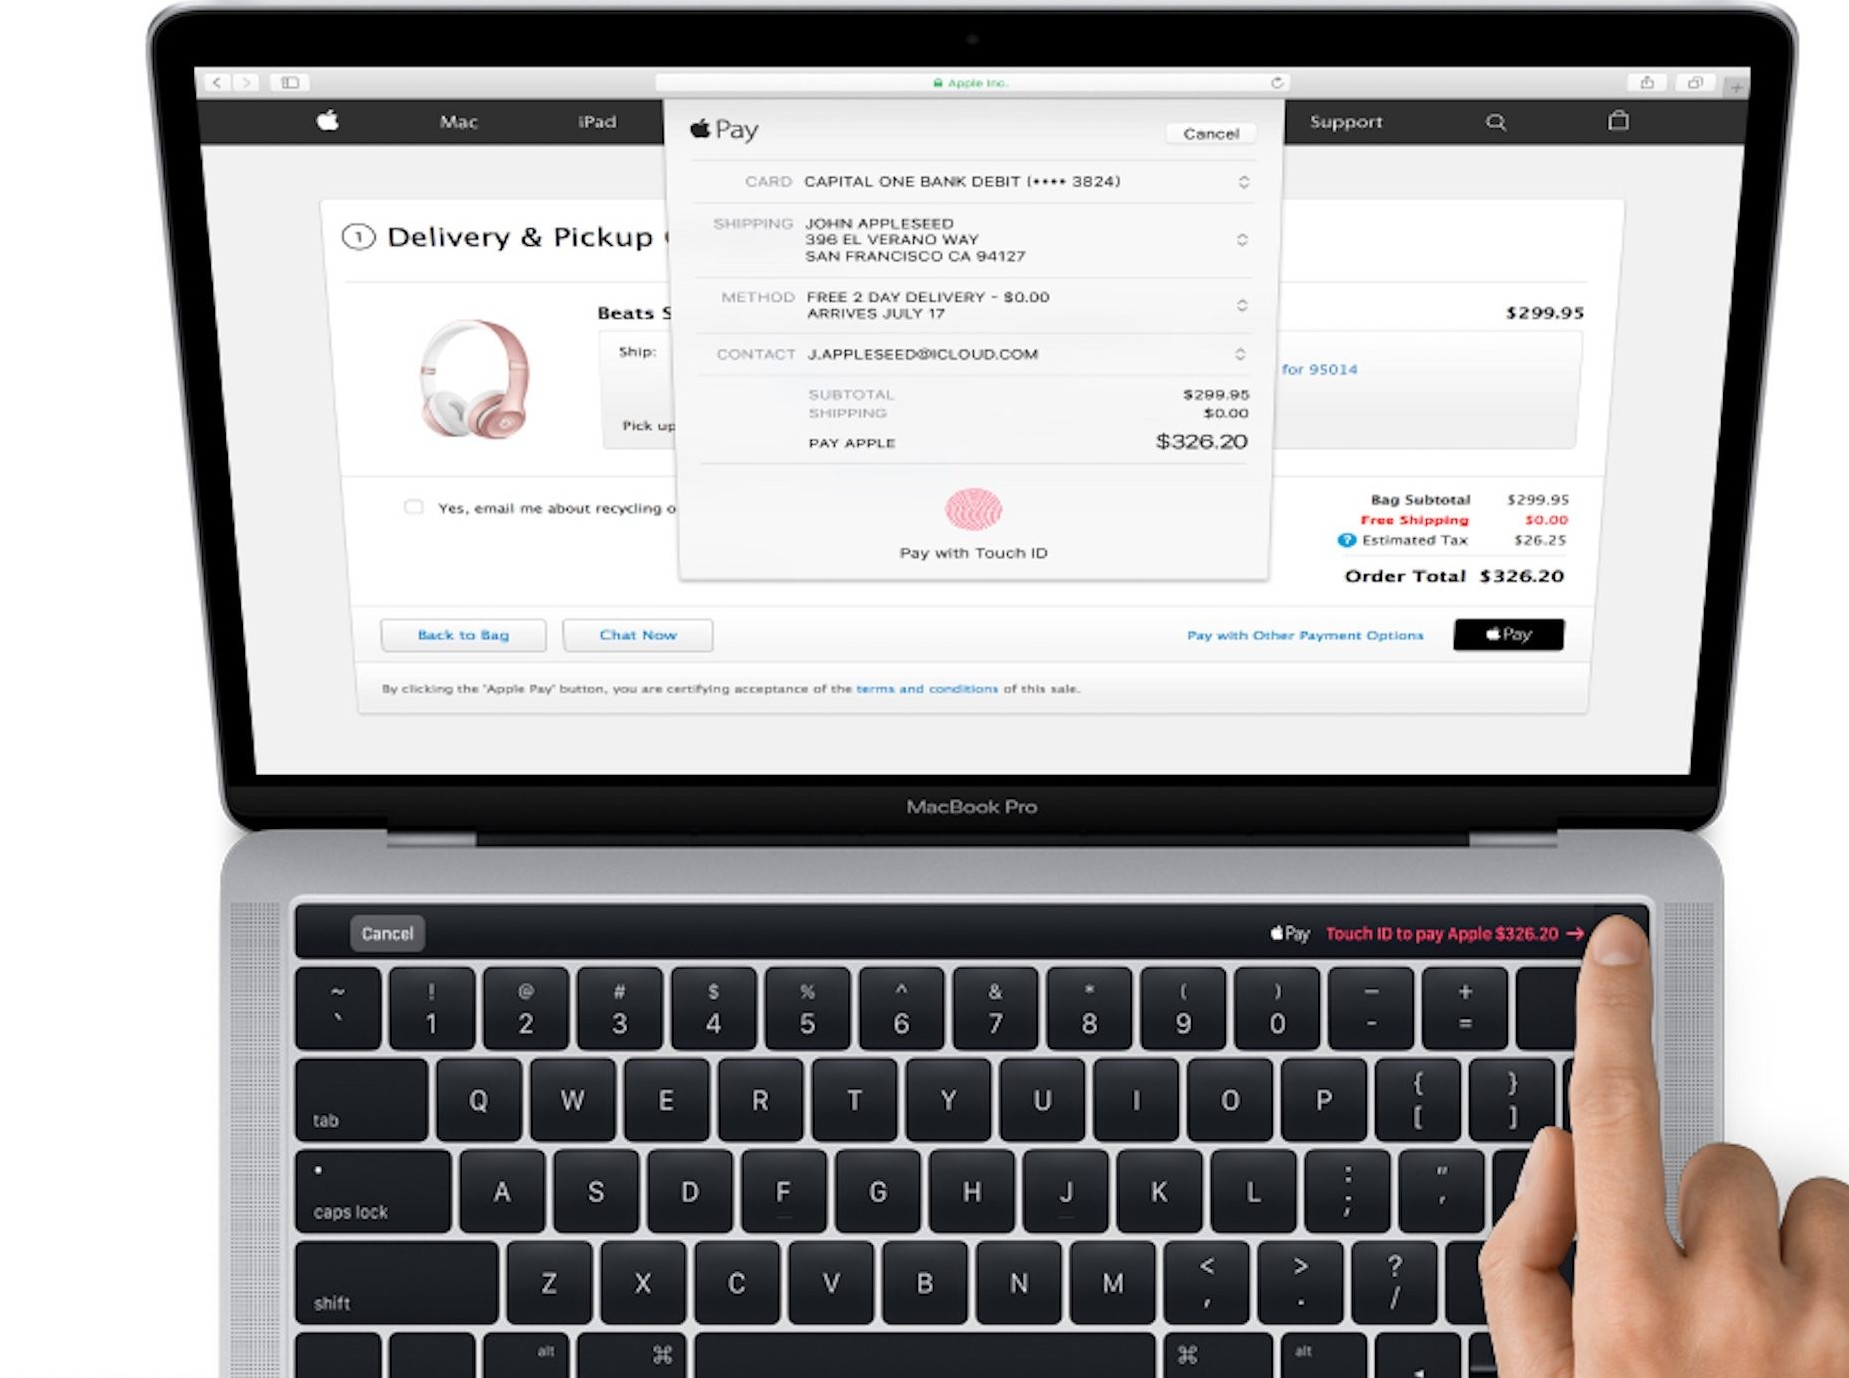 New MacBook Pro Rumors suggest Magic Toolbar with Touch ID and Apple pay